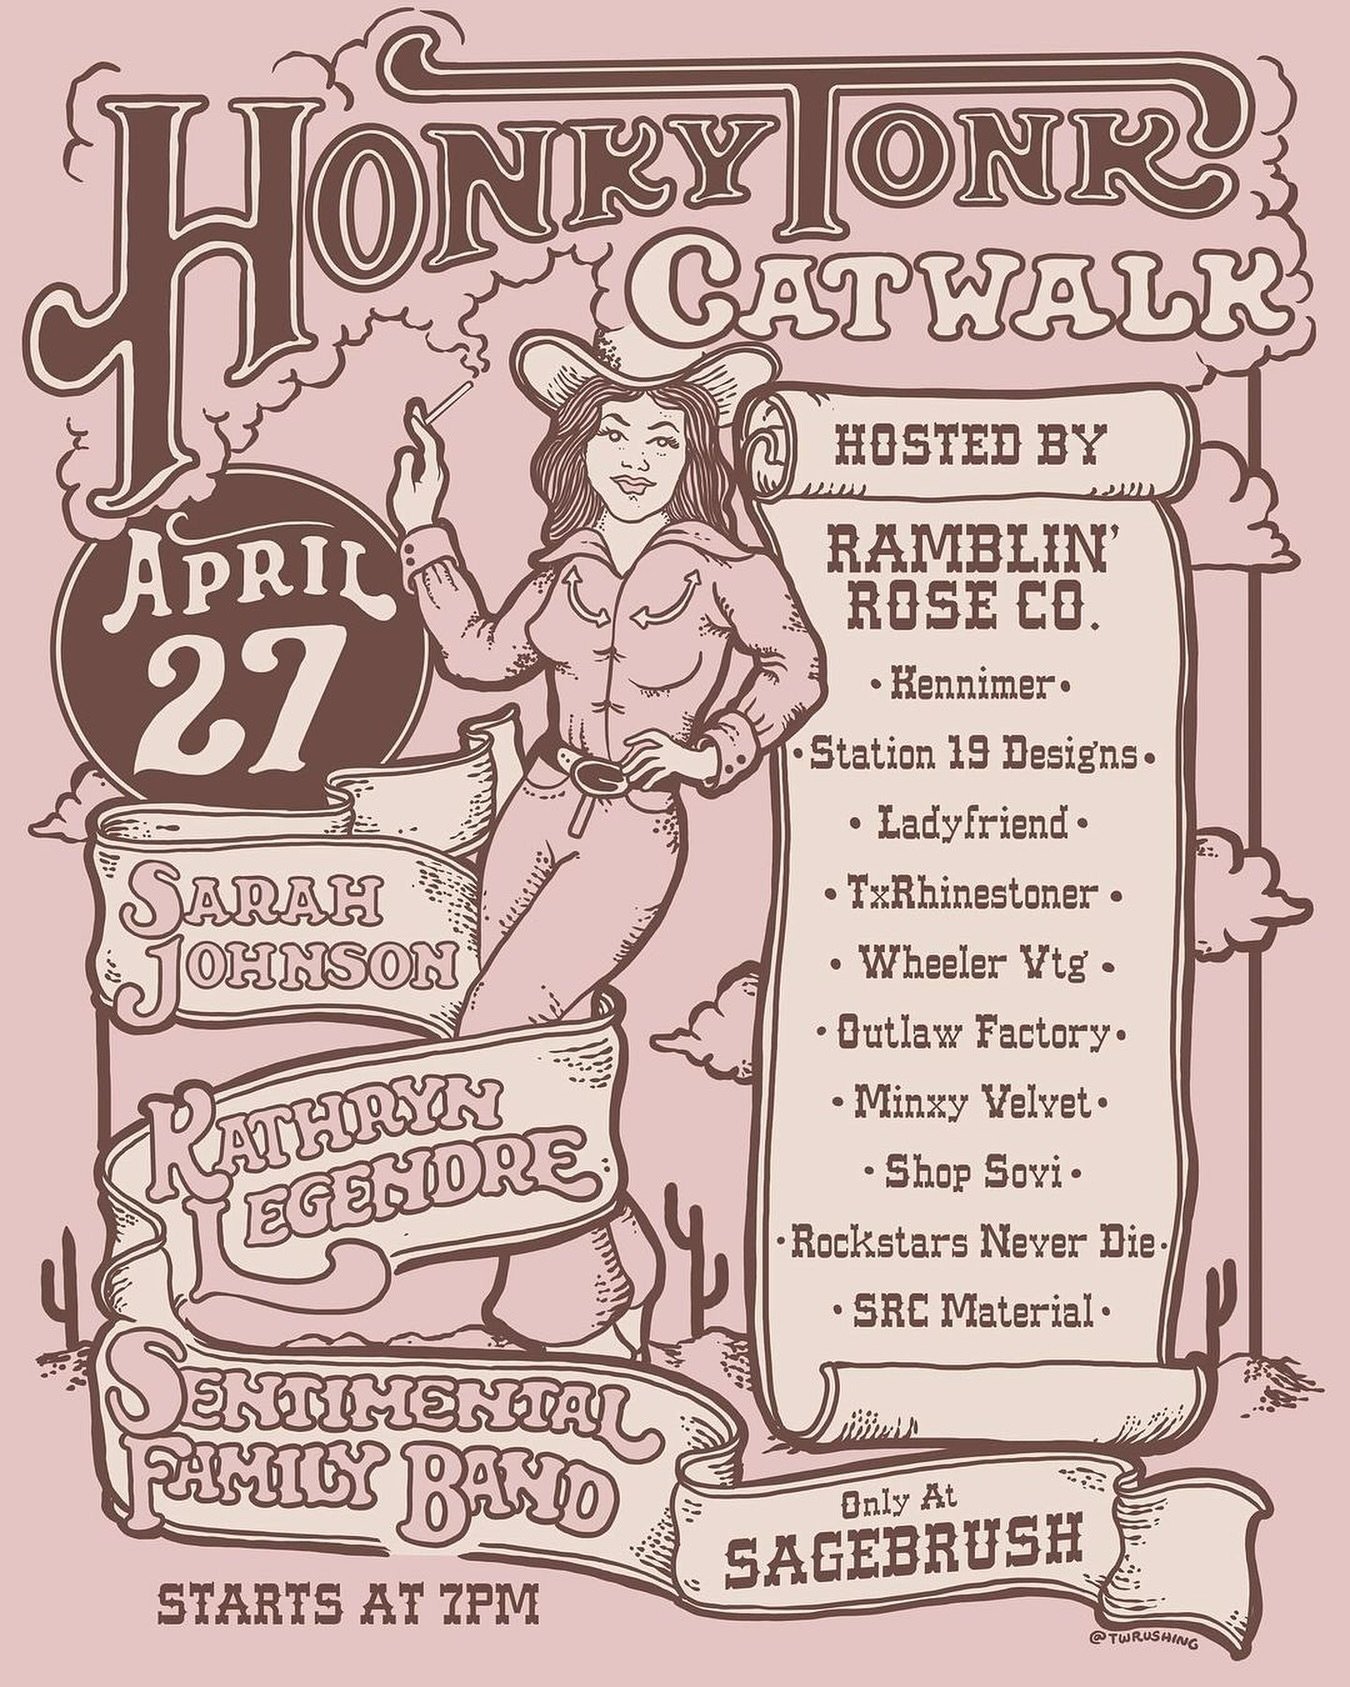 April 27, 2024 - Breaking out my best duds tonight for the Honky Tonk Catwalk, hosted by @ramblinrose.co 🤩 I&rsquo;m honored to be part of this stellar event, featuring some of the best designers, fashion, models, bands, and folks from around Austin